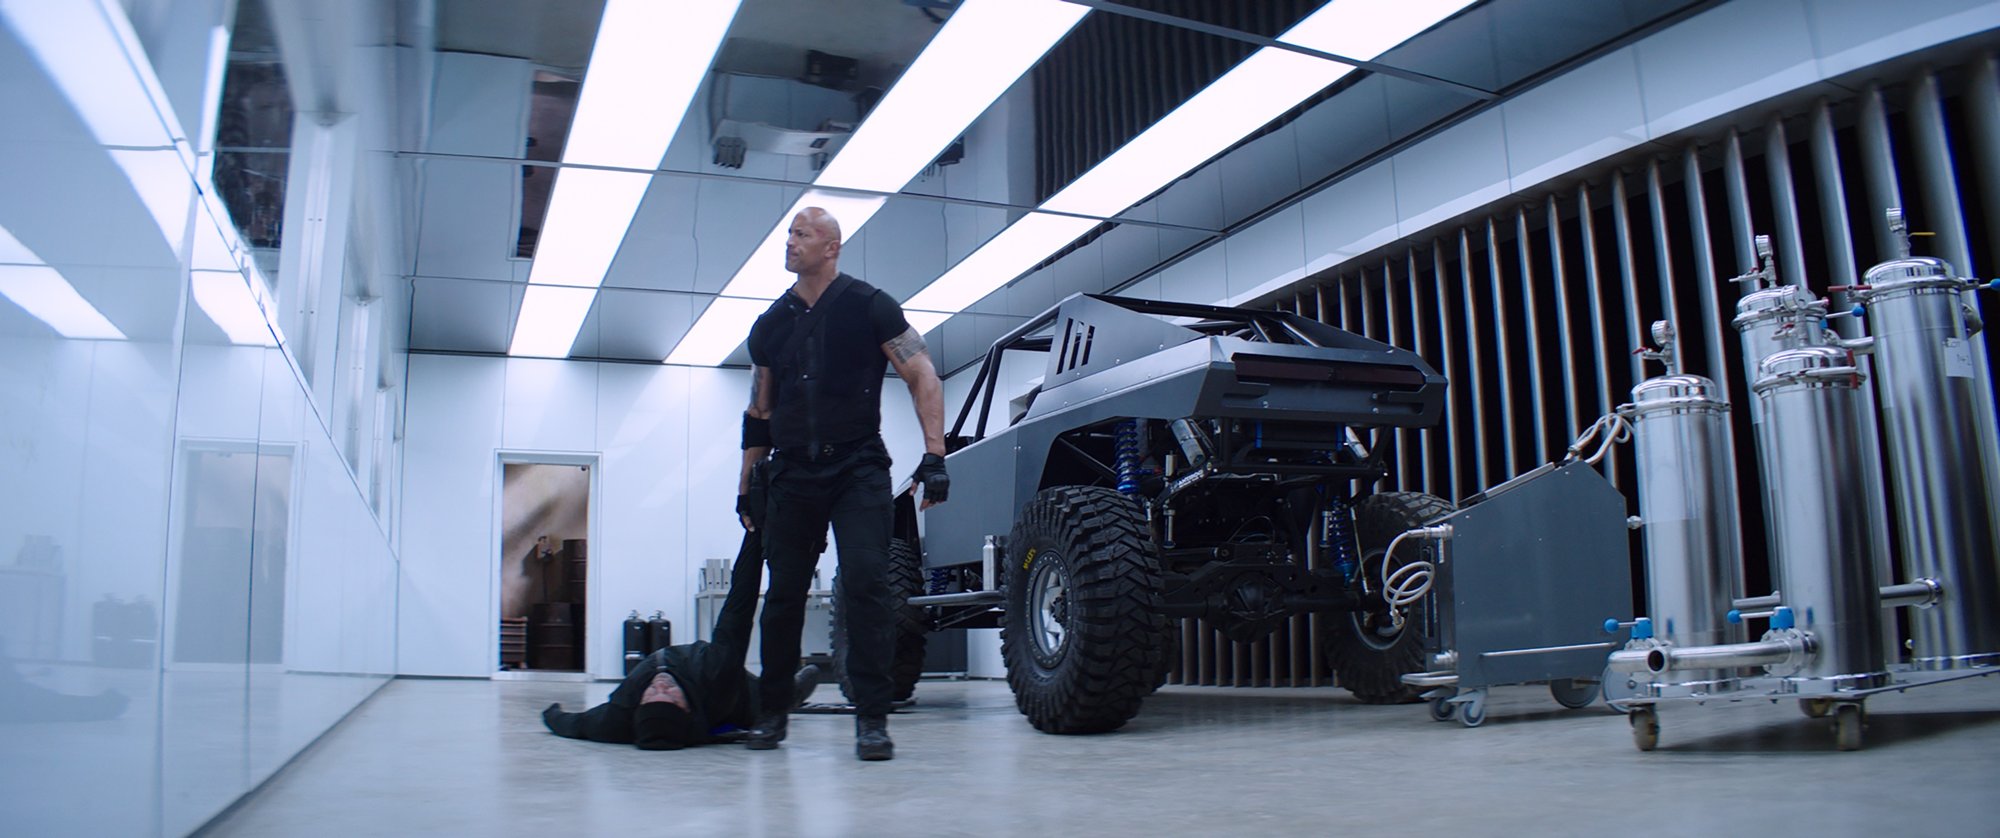 The Rock stars as Luke Hobbs in Universal Pictures' Fast & Furious Presents: Hobbs & Shaw (2019)